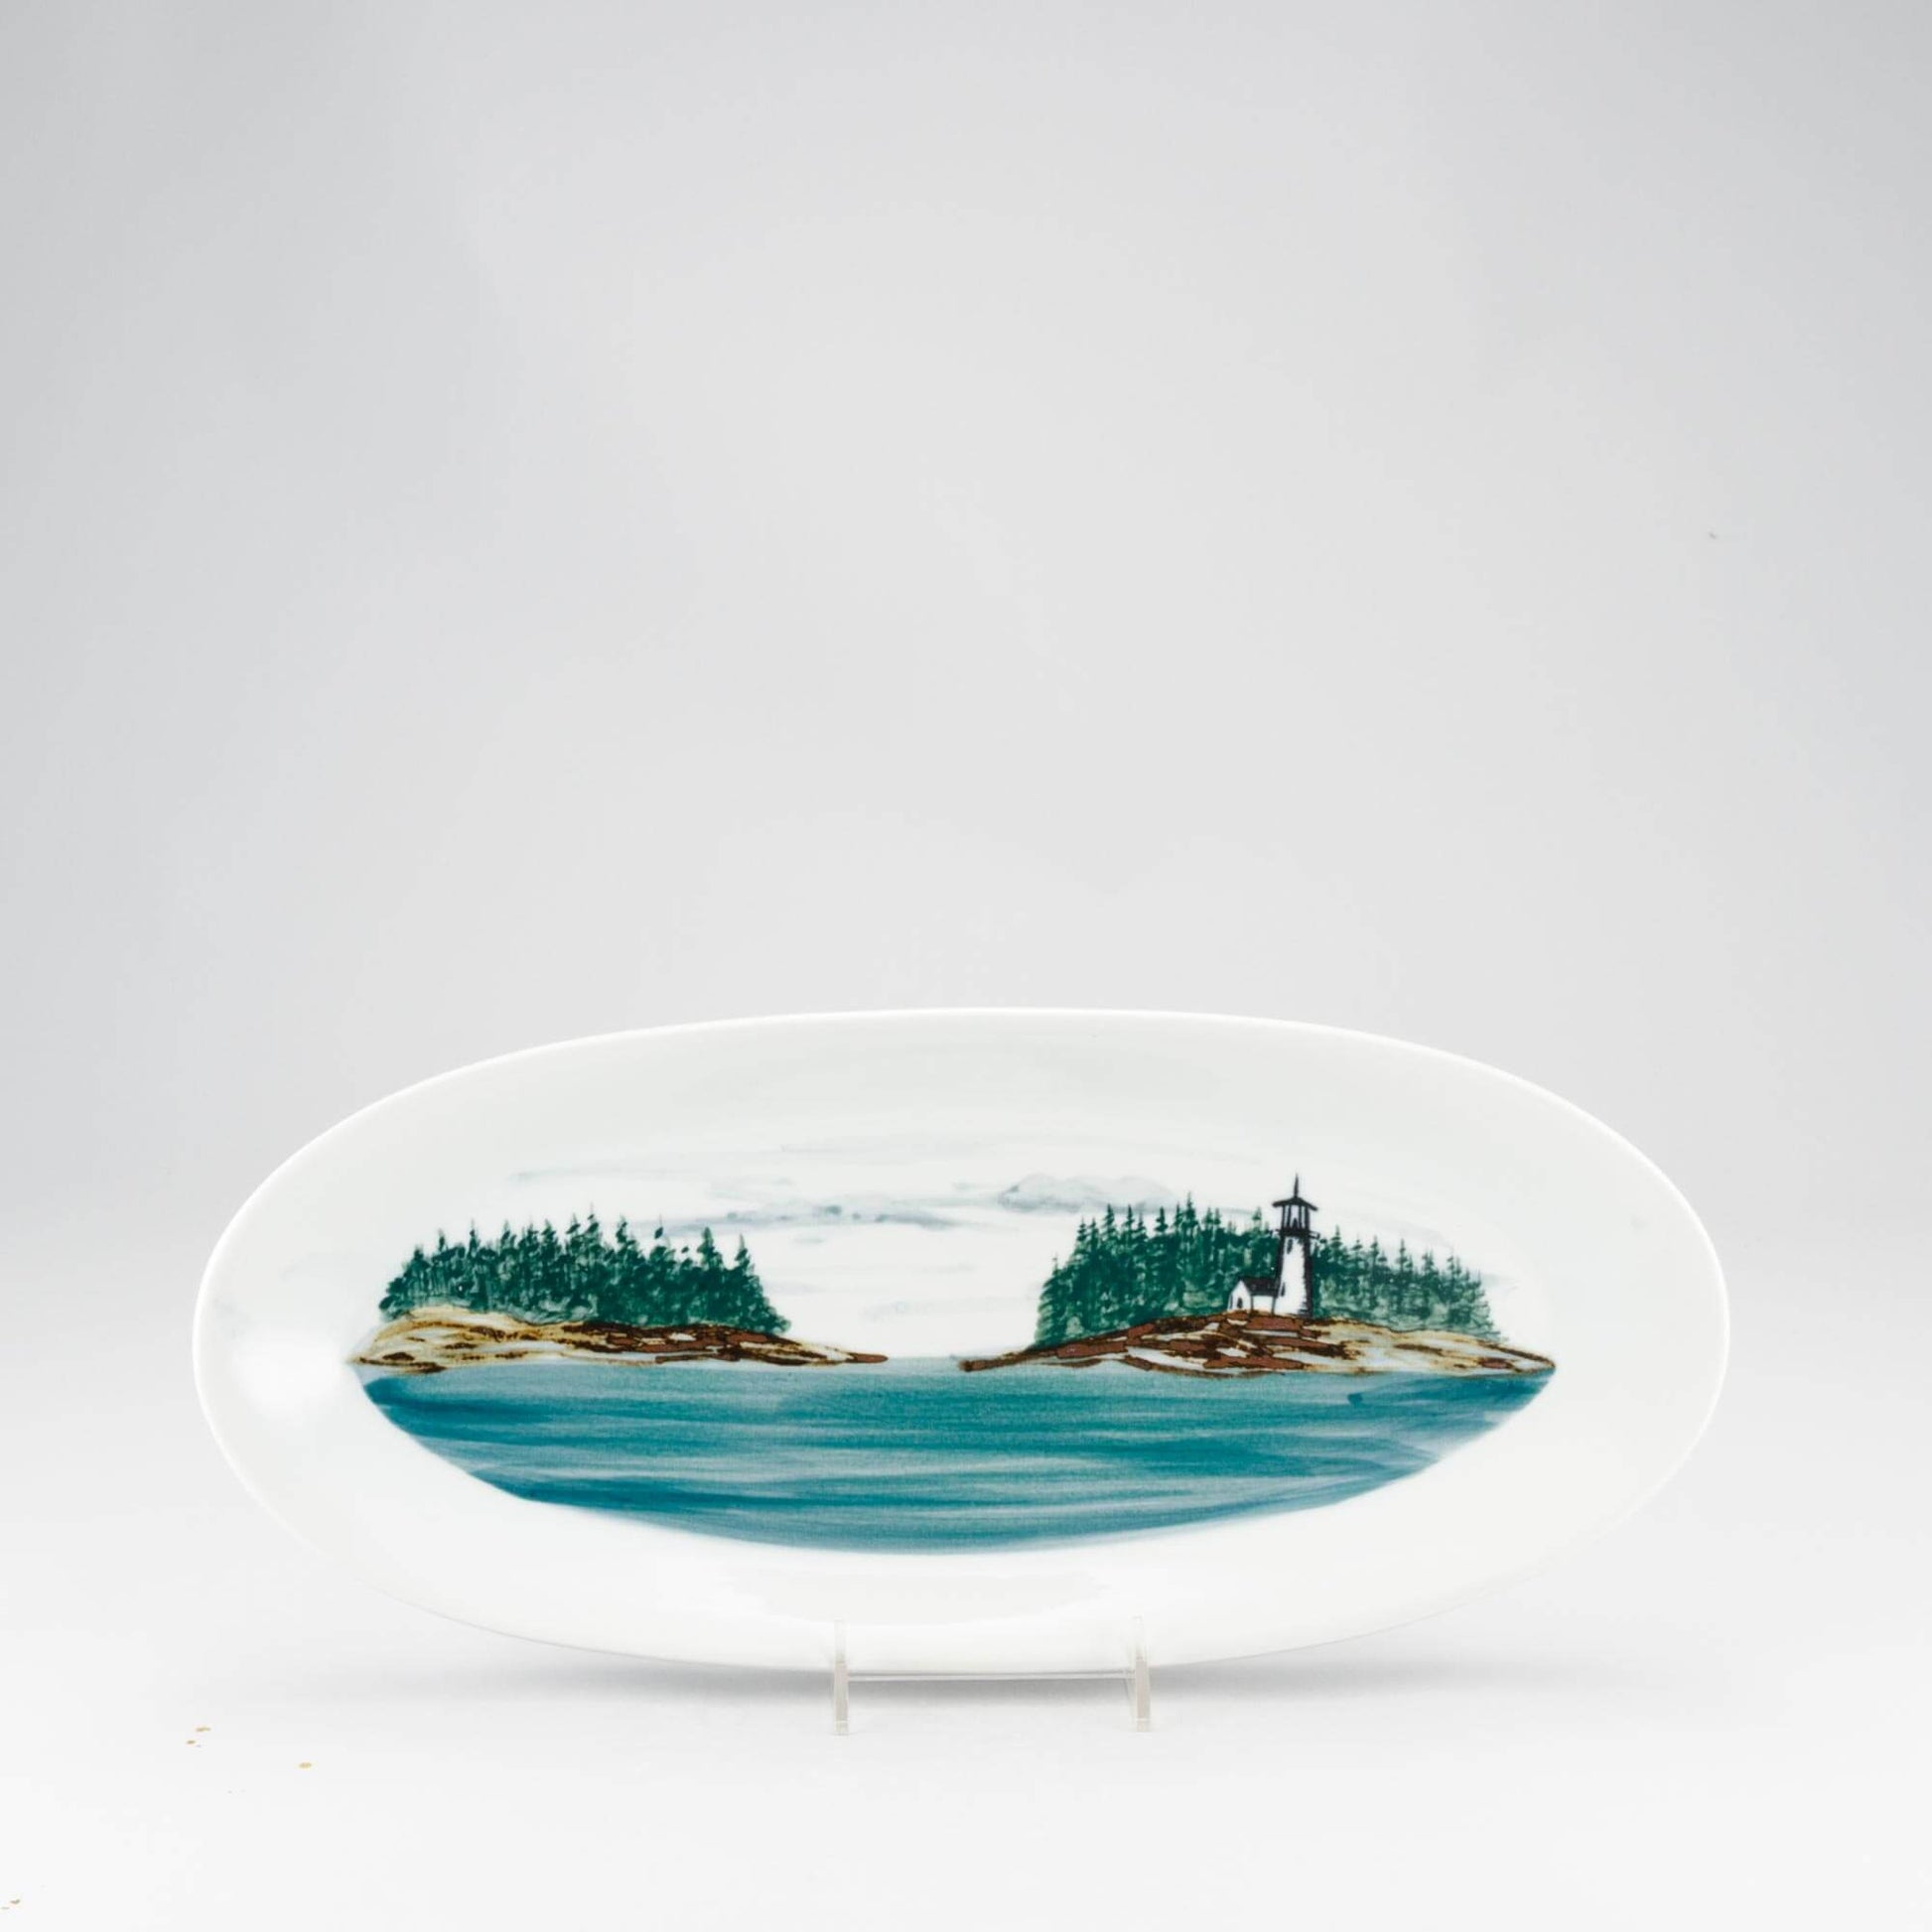 Handmade Pottery Boat Platter made by Georgetown Pottery in Maine